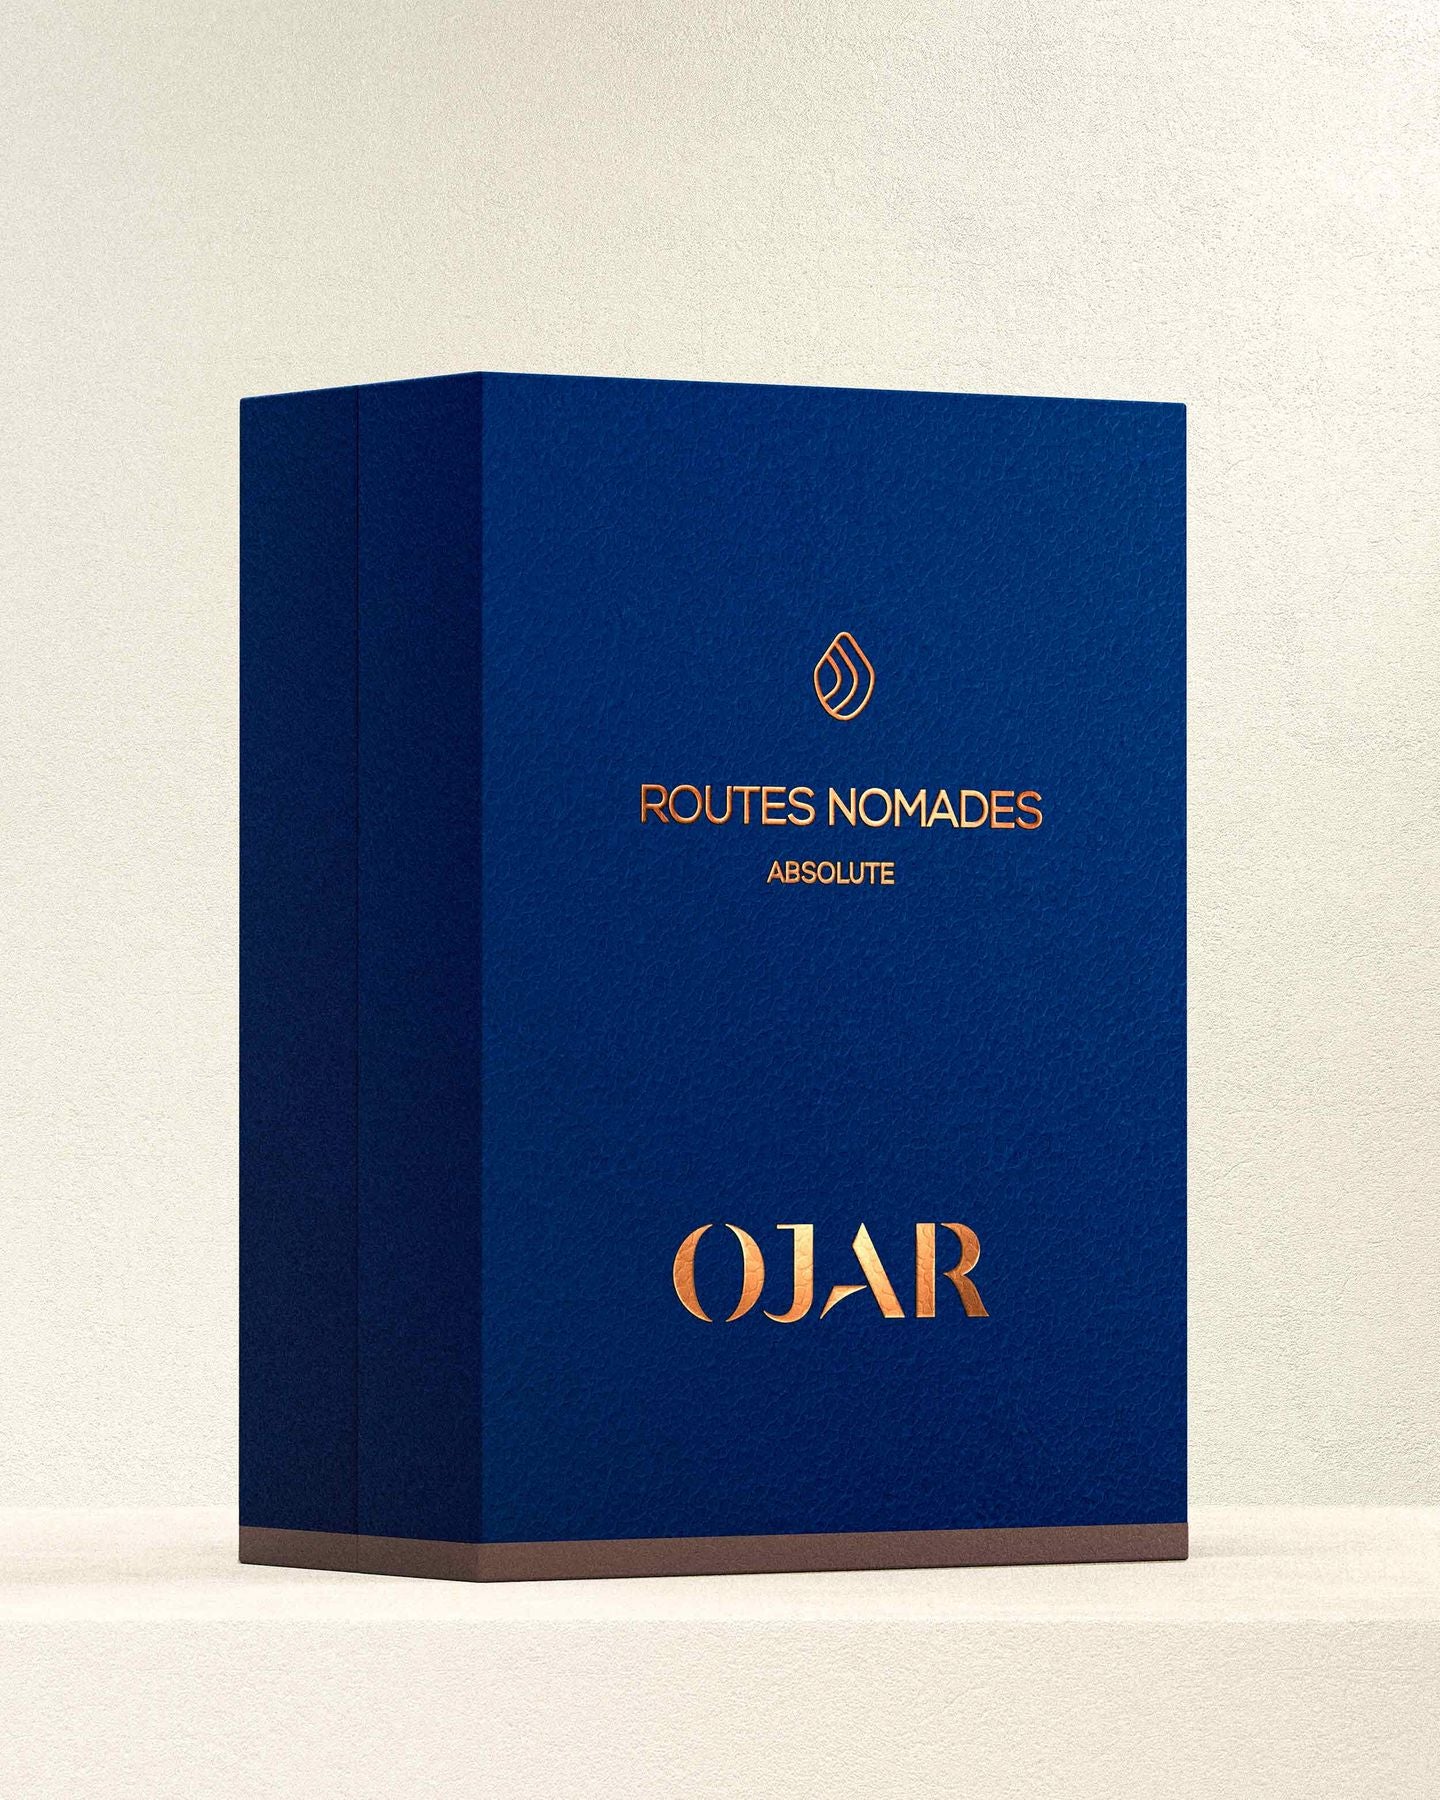 OJAR ROUTES NOMADES PERFUME OIL ABSOLUTE 20 ML ROUTES NOMADES PERFUME OIL ABSOLUTE 20 ML 2000001833148 €165,00